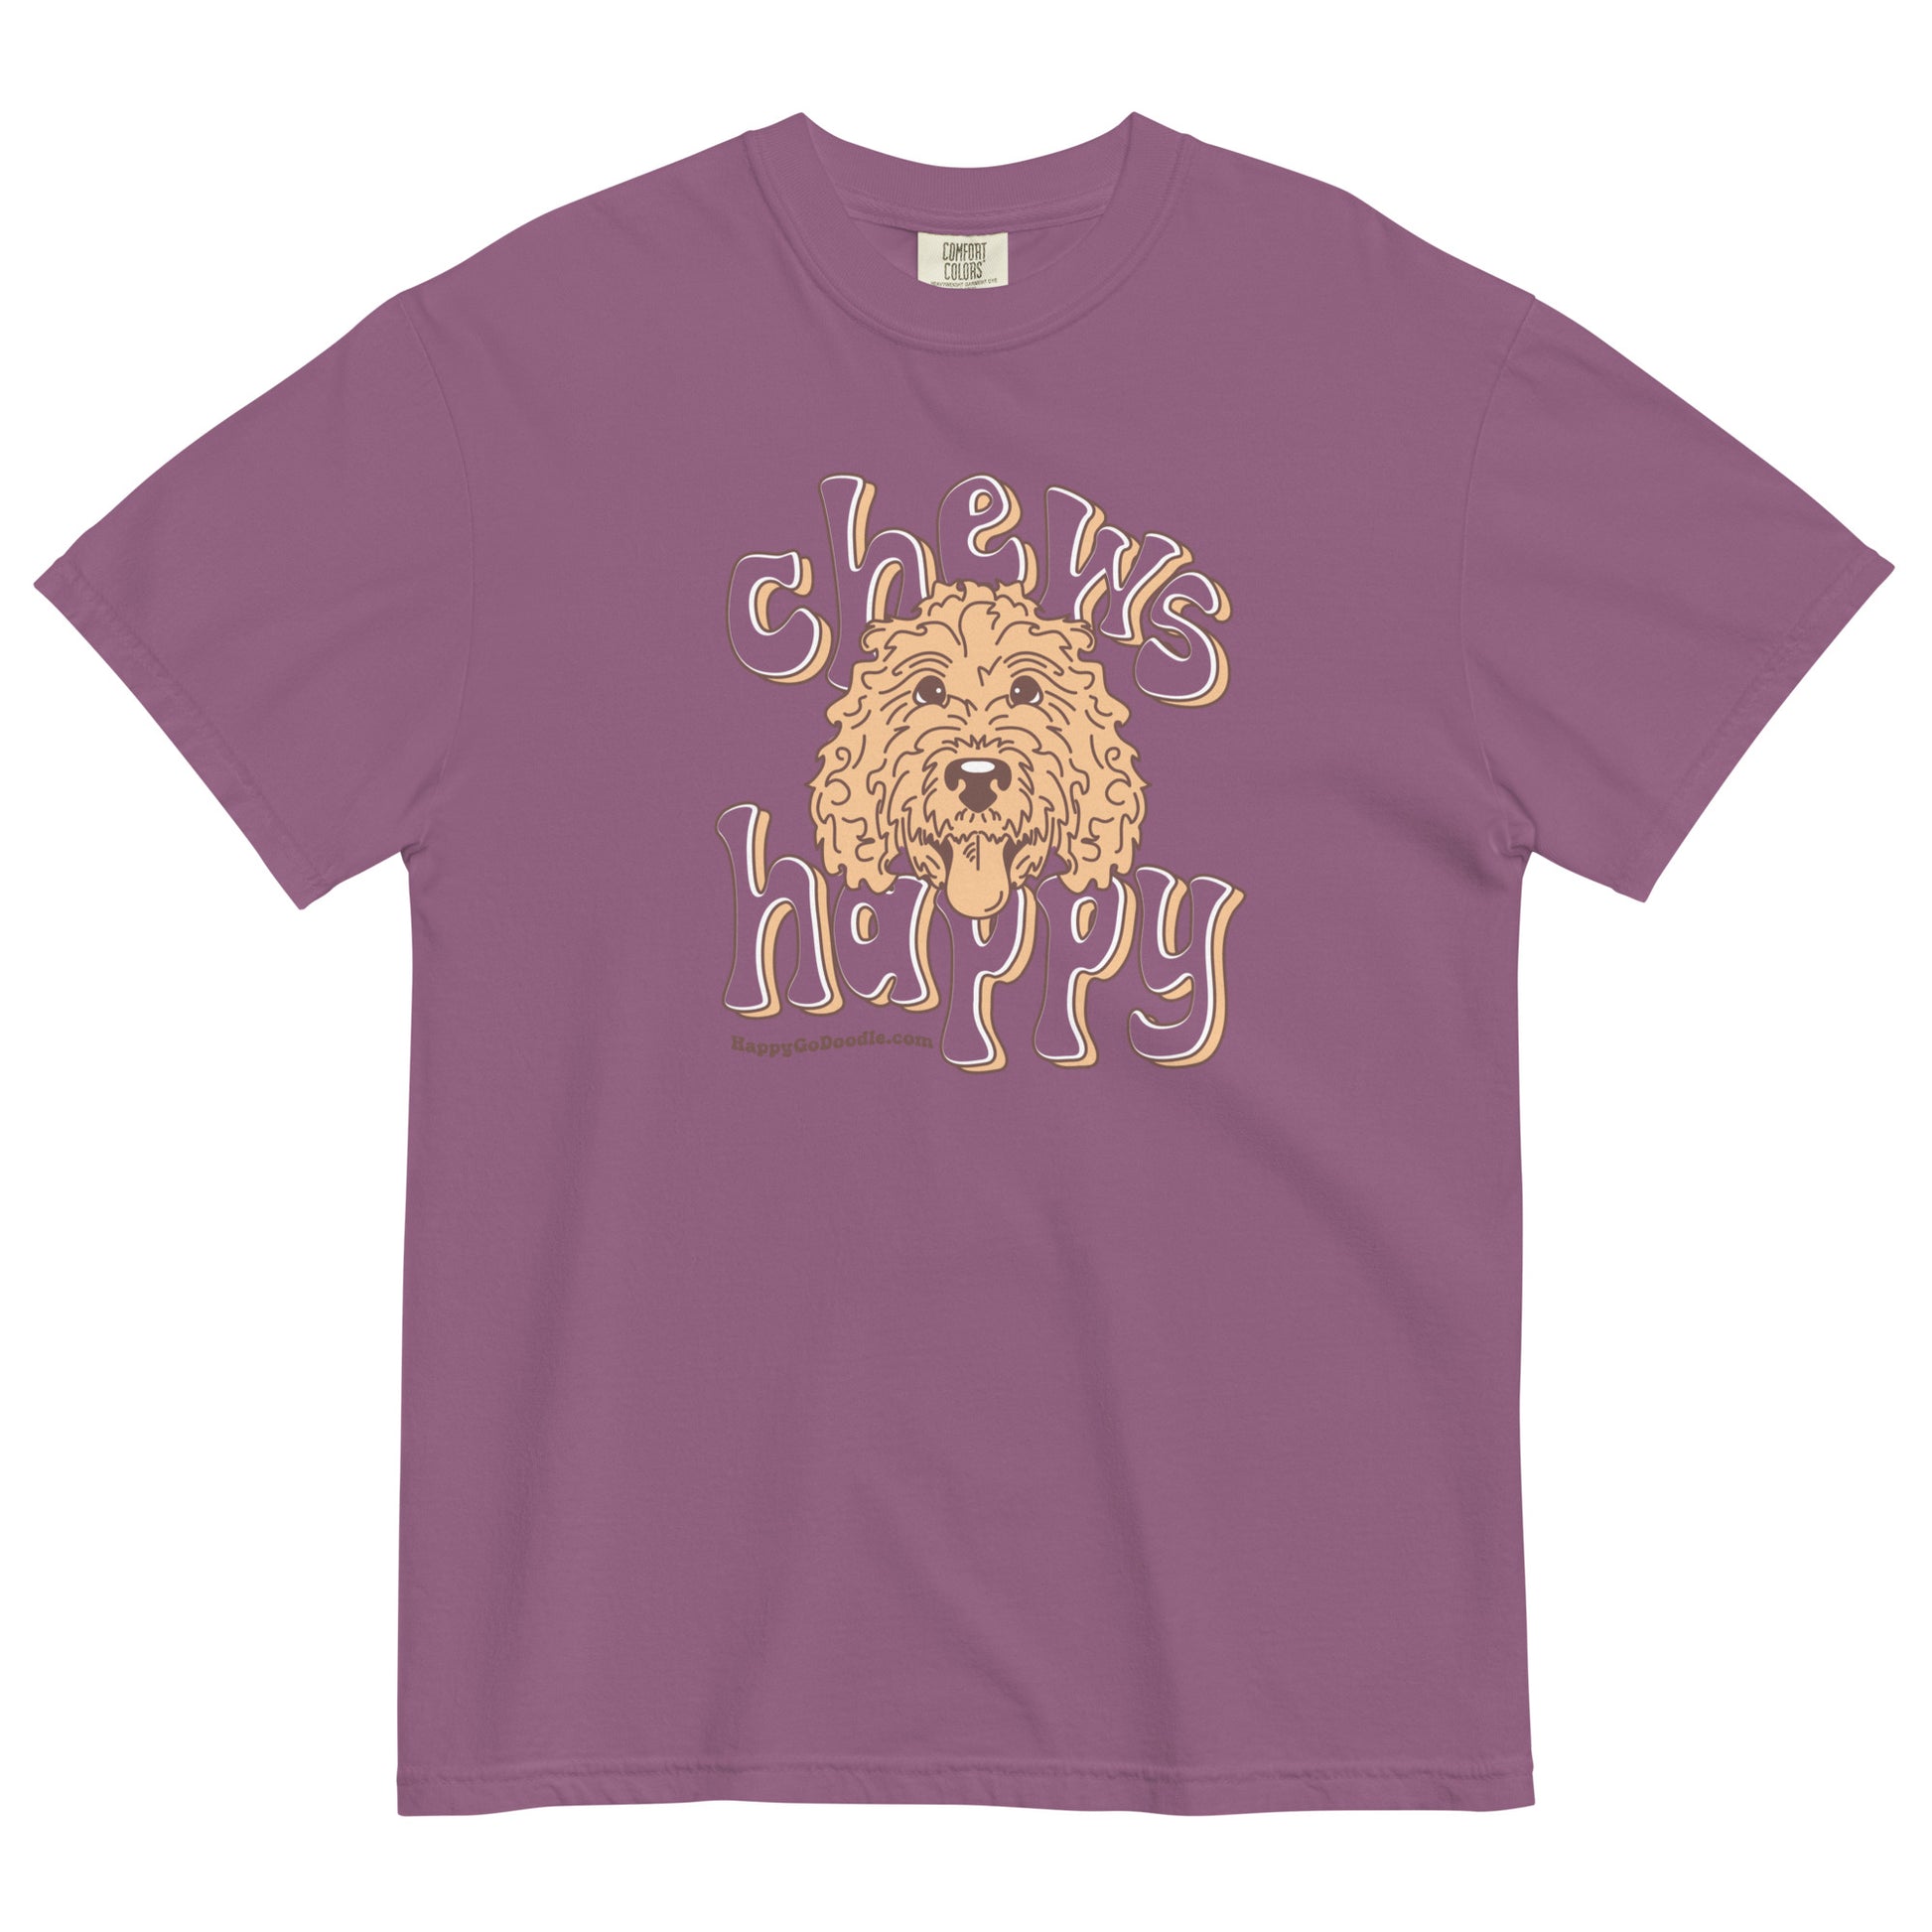 Goldendoodle comfort colors t-shirt with Goldendoodle face and words "Chews Happy" in berry color